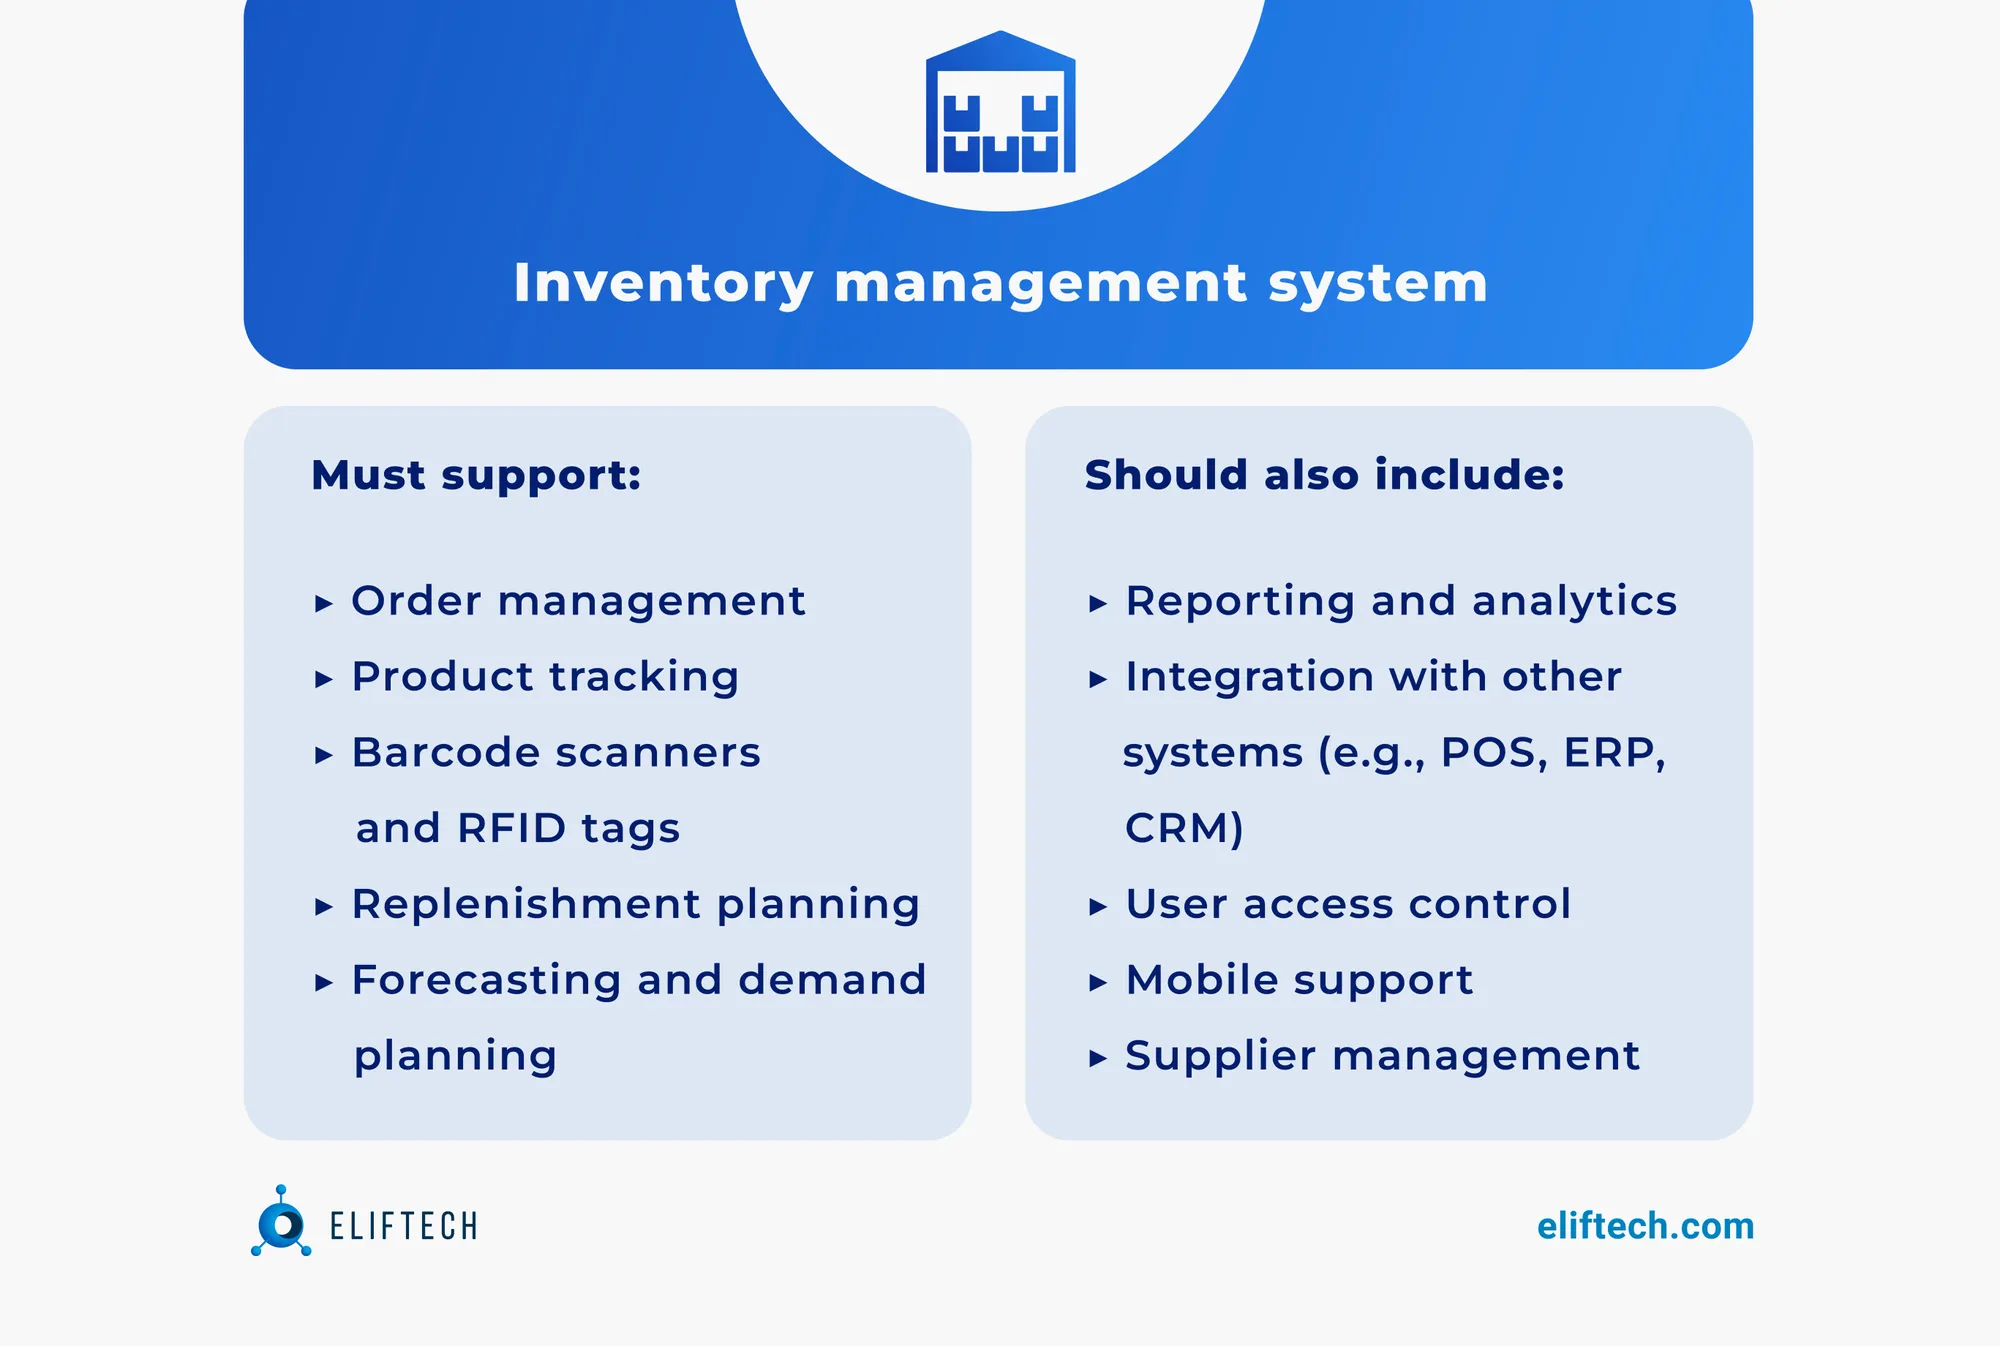 3PL inventory software provides crucial functions